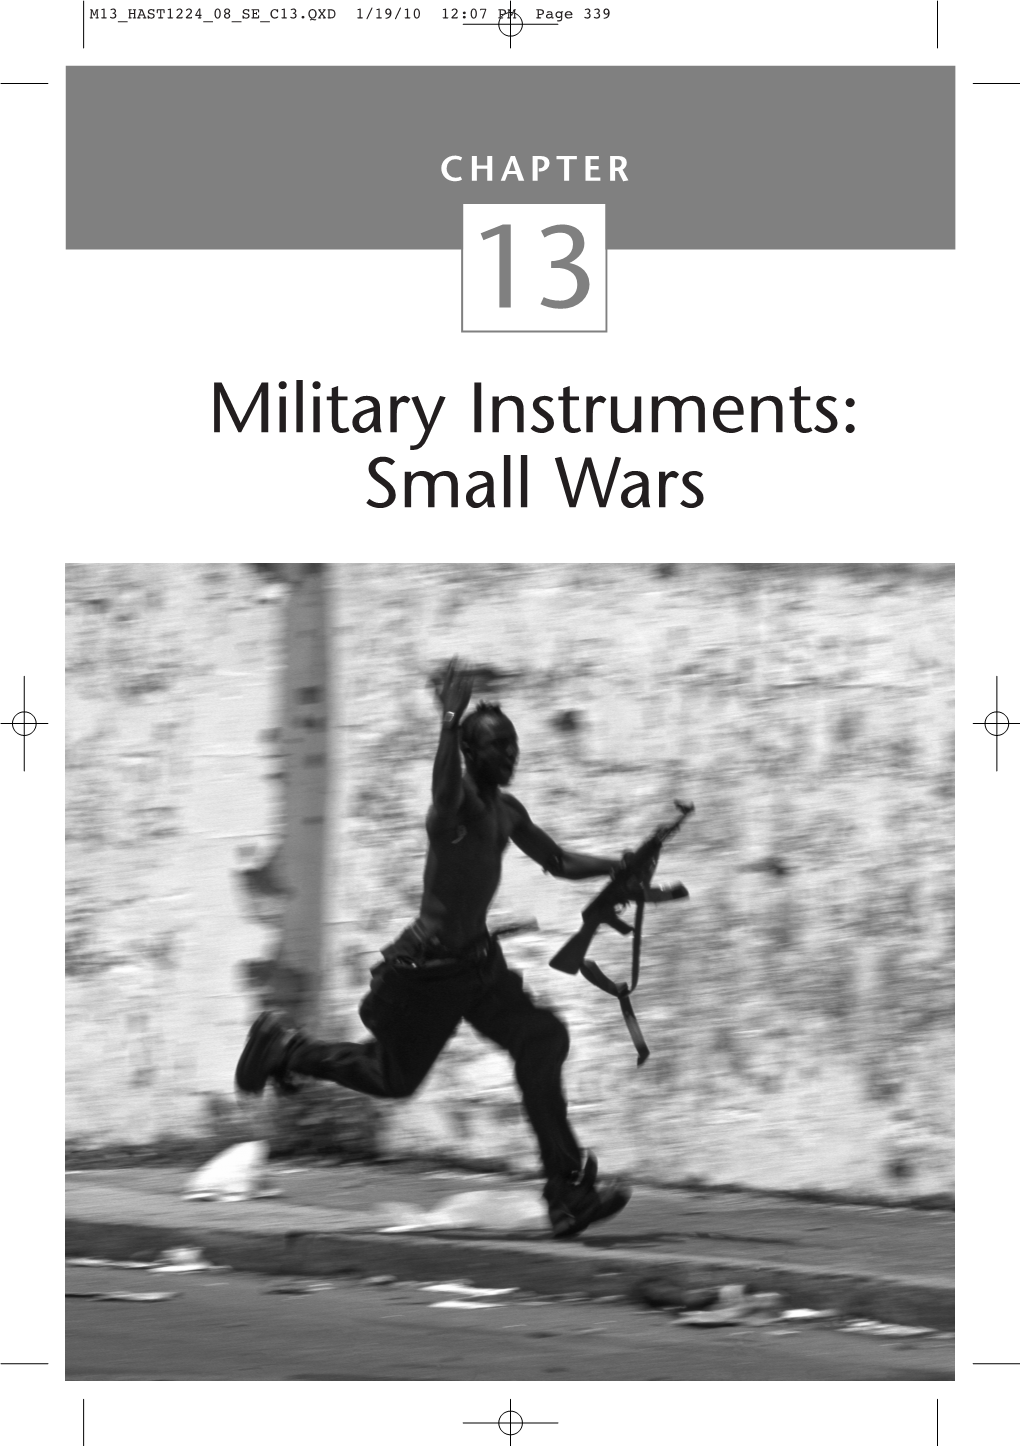 Military Instruments: Small Wars M13 HAST1224 08 SE C13.QXD 1/19/10 12:07 PM Page 340